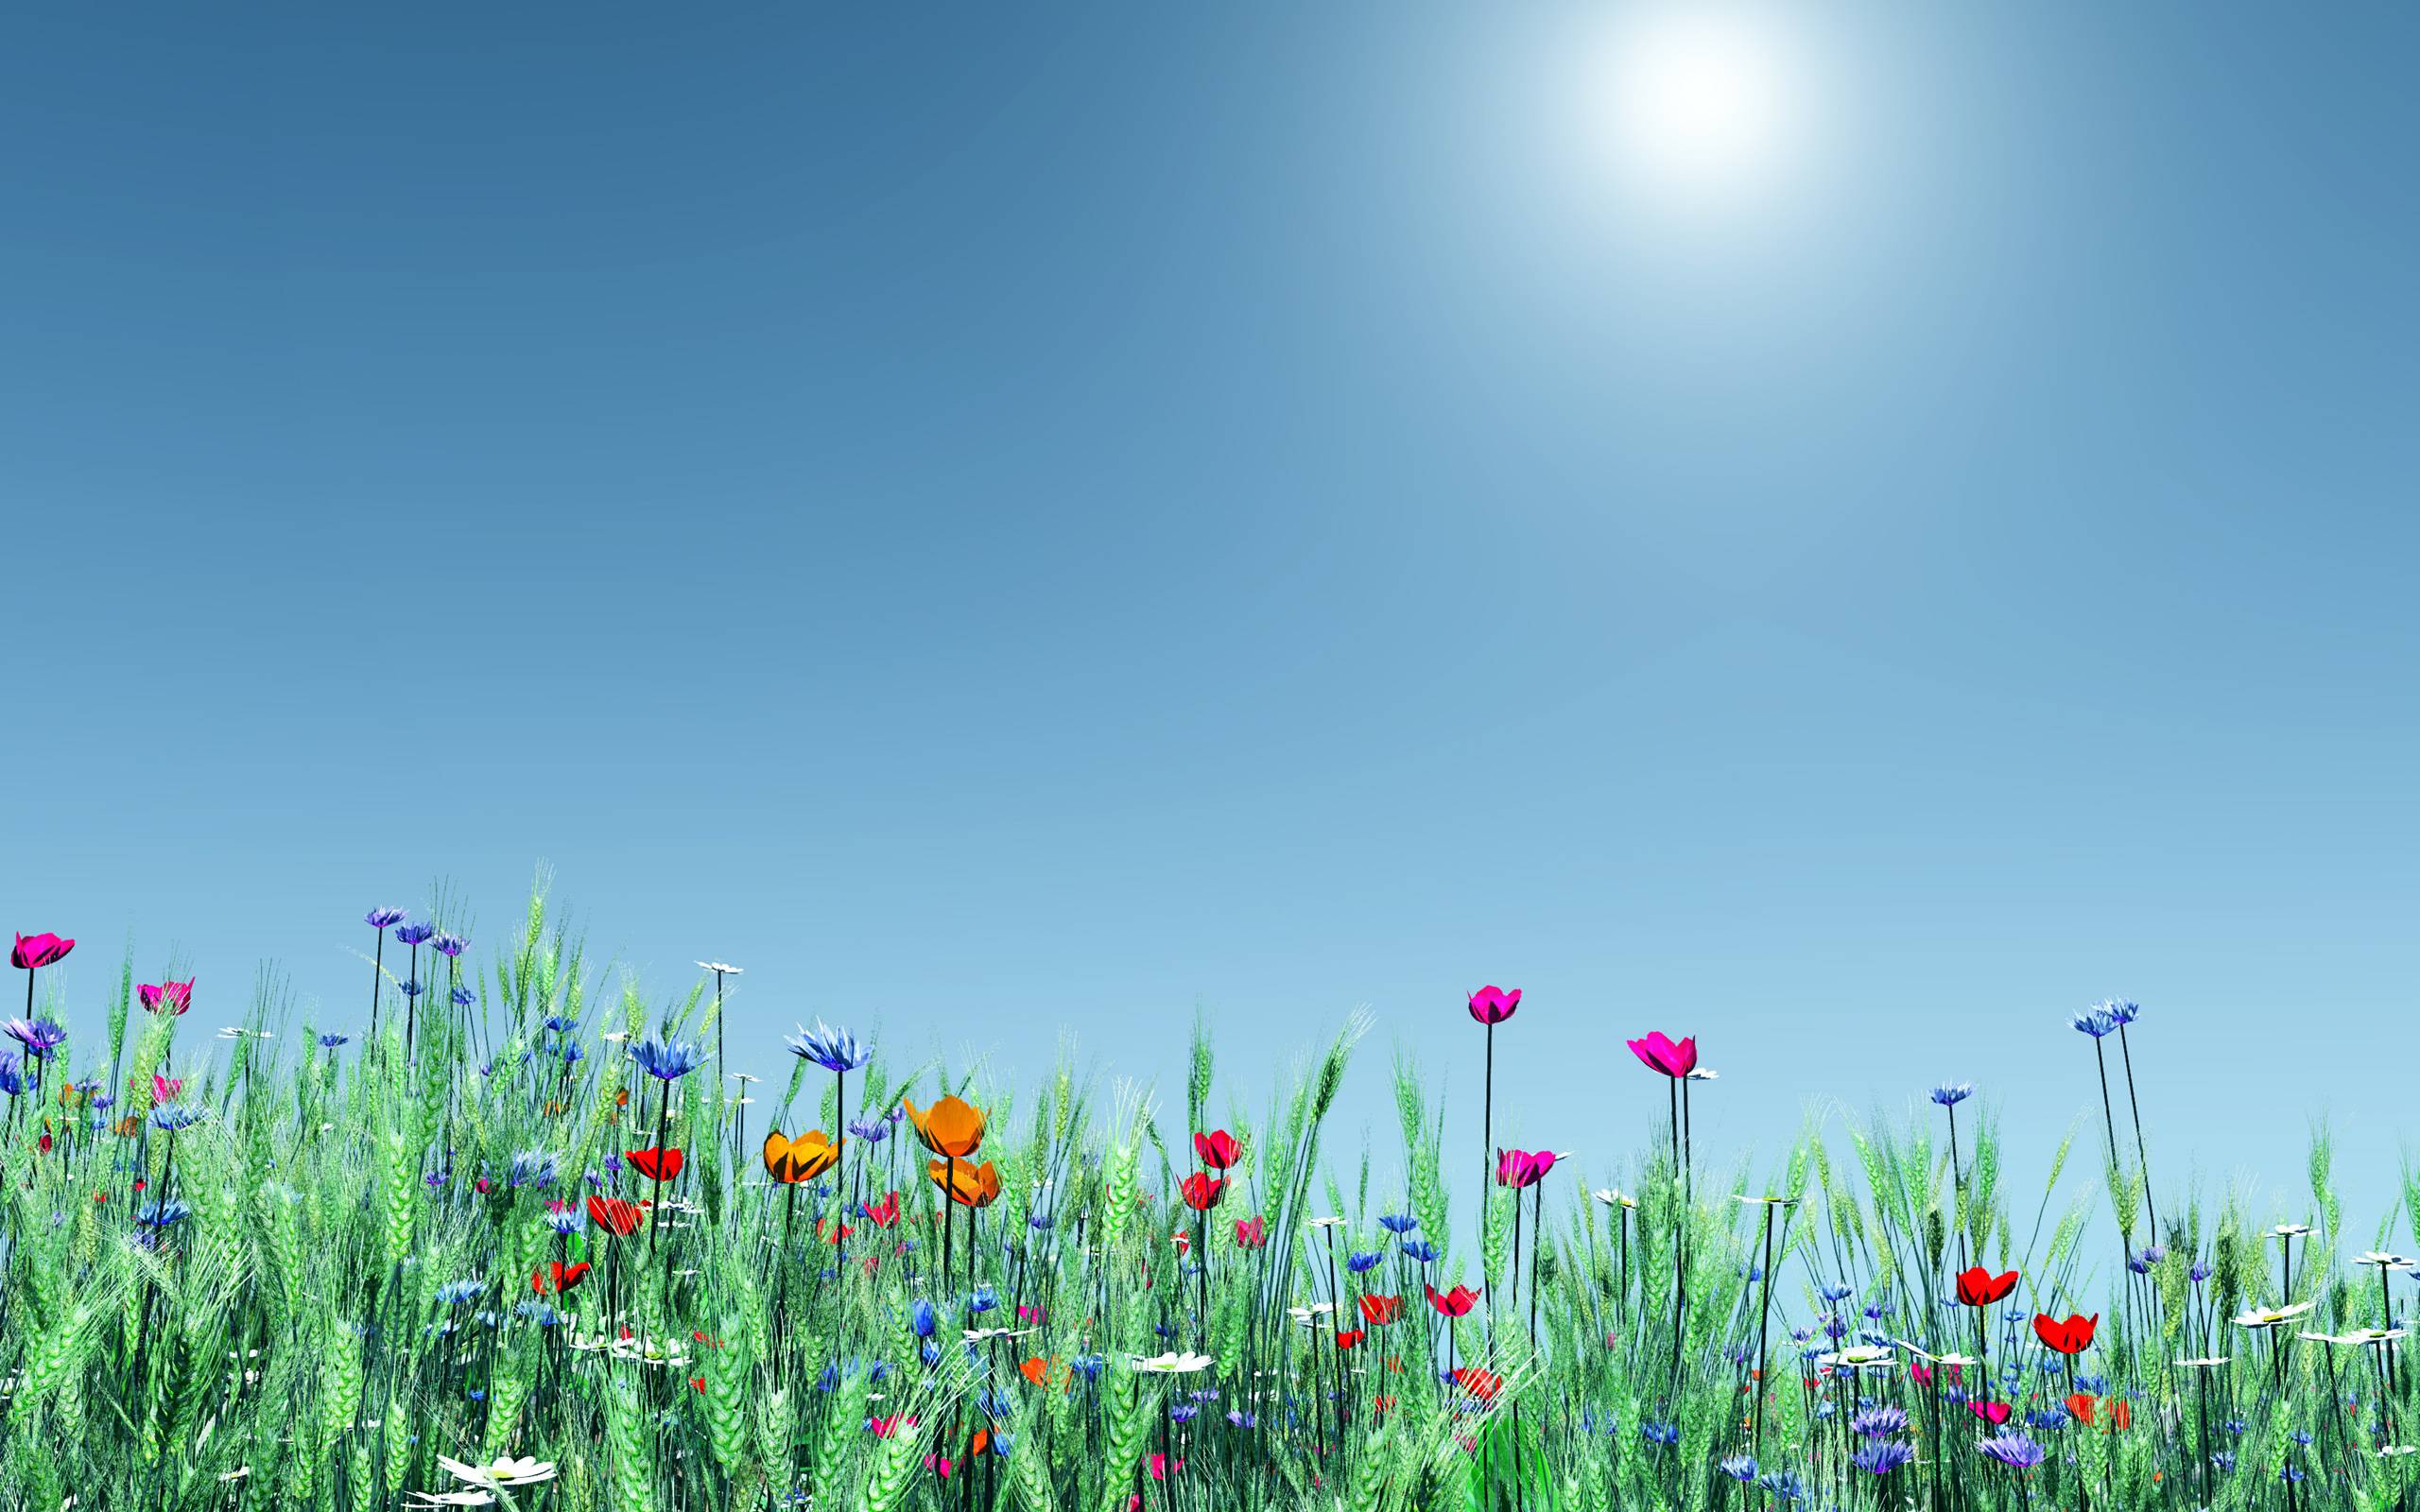 Spring Flowers Windows 8 and 8.1 Wallpaper. Windows 8.1 Themes